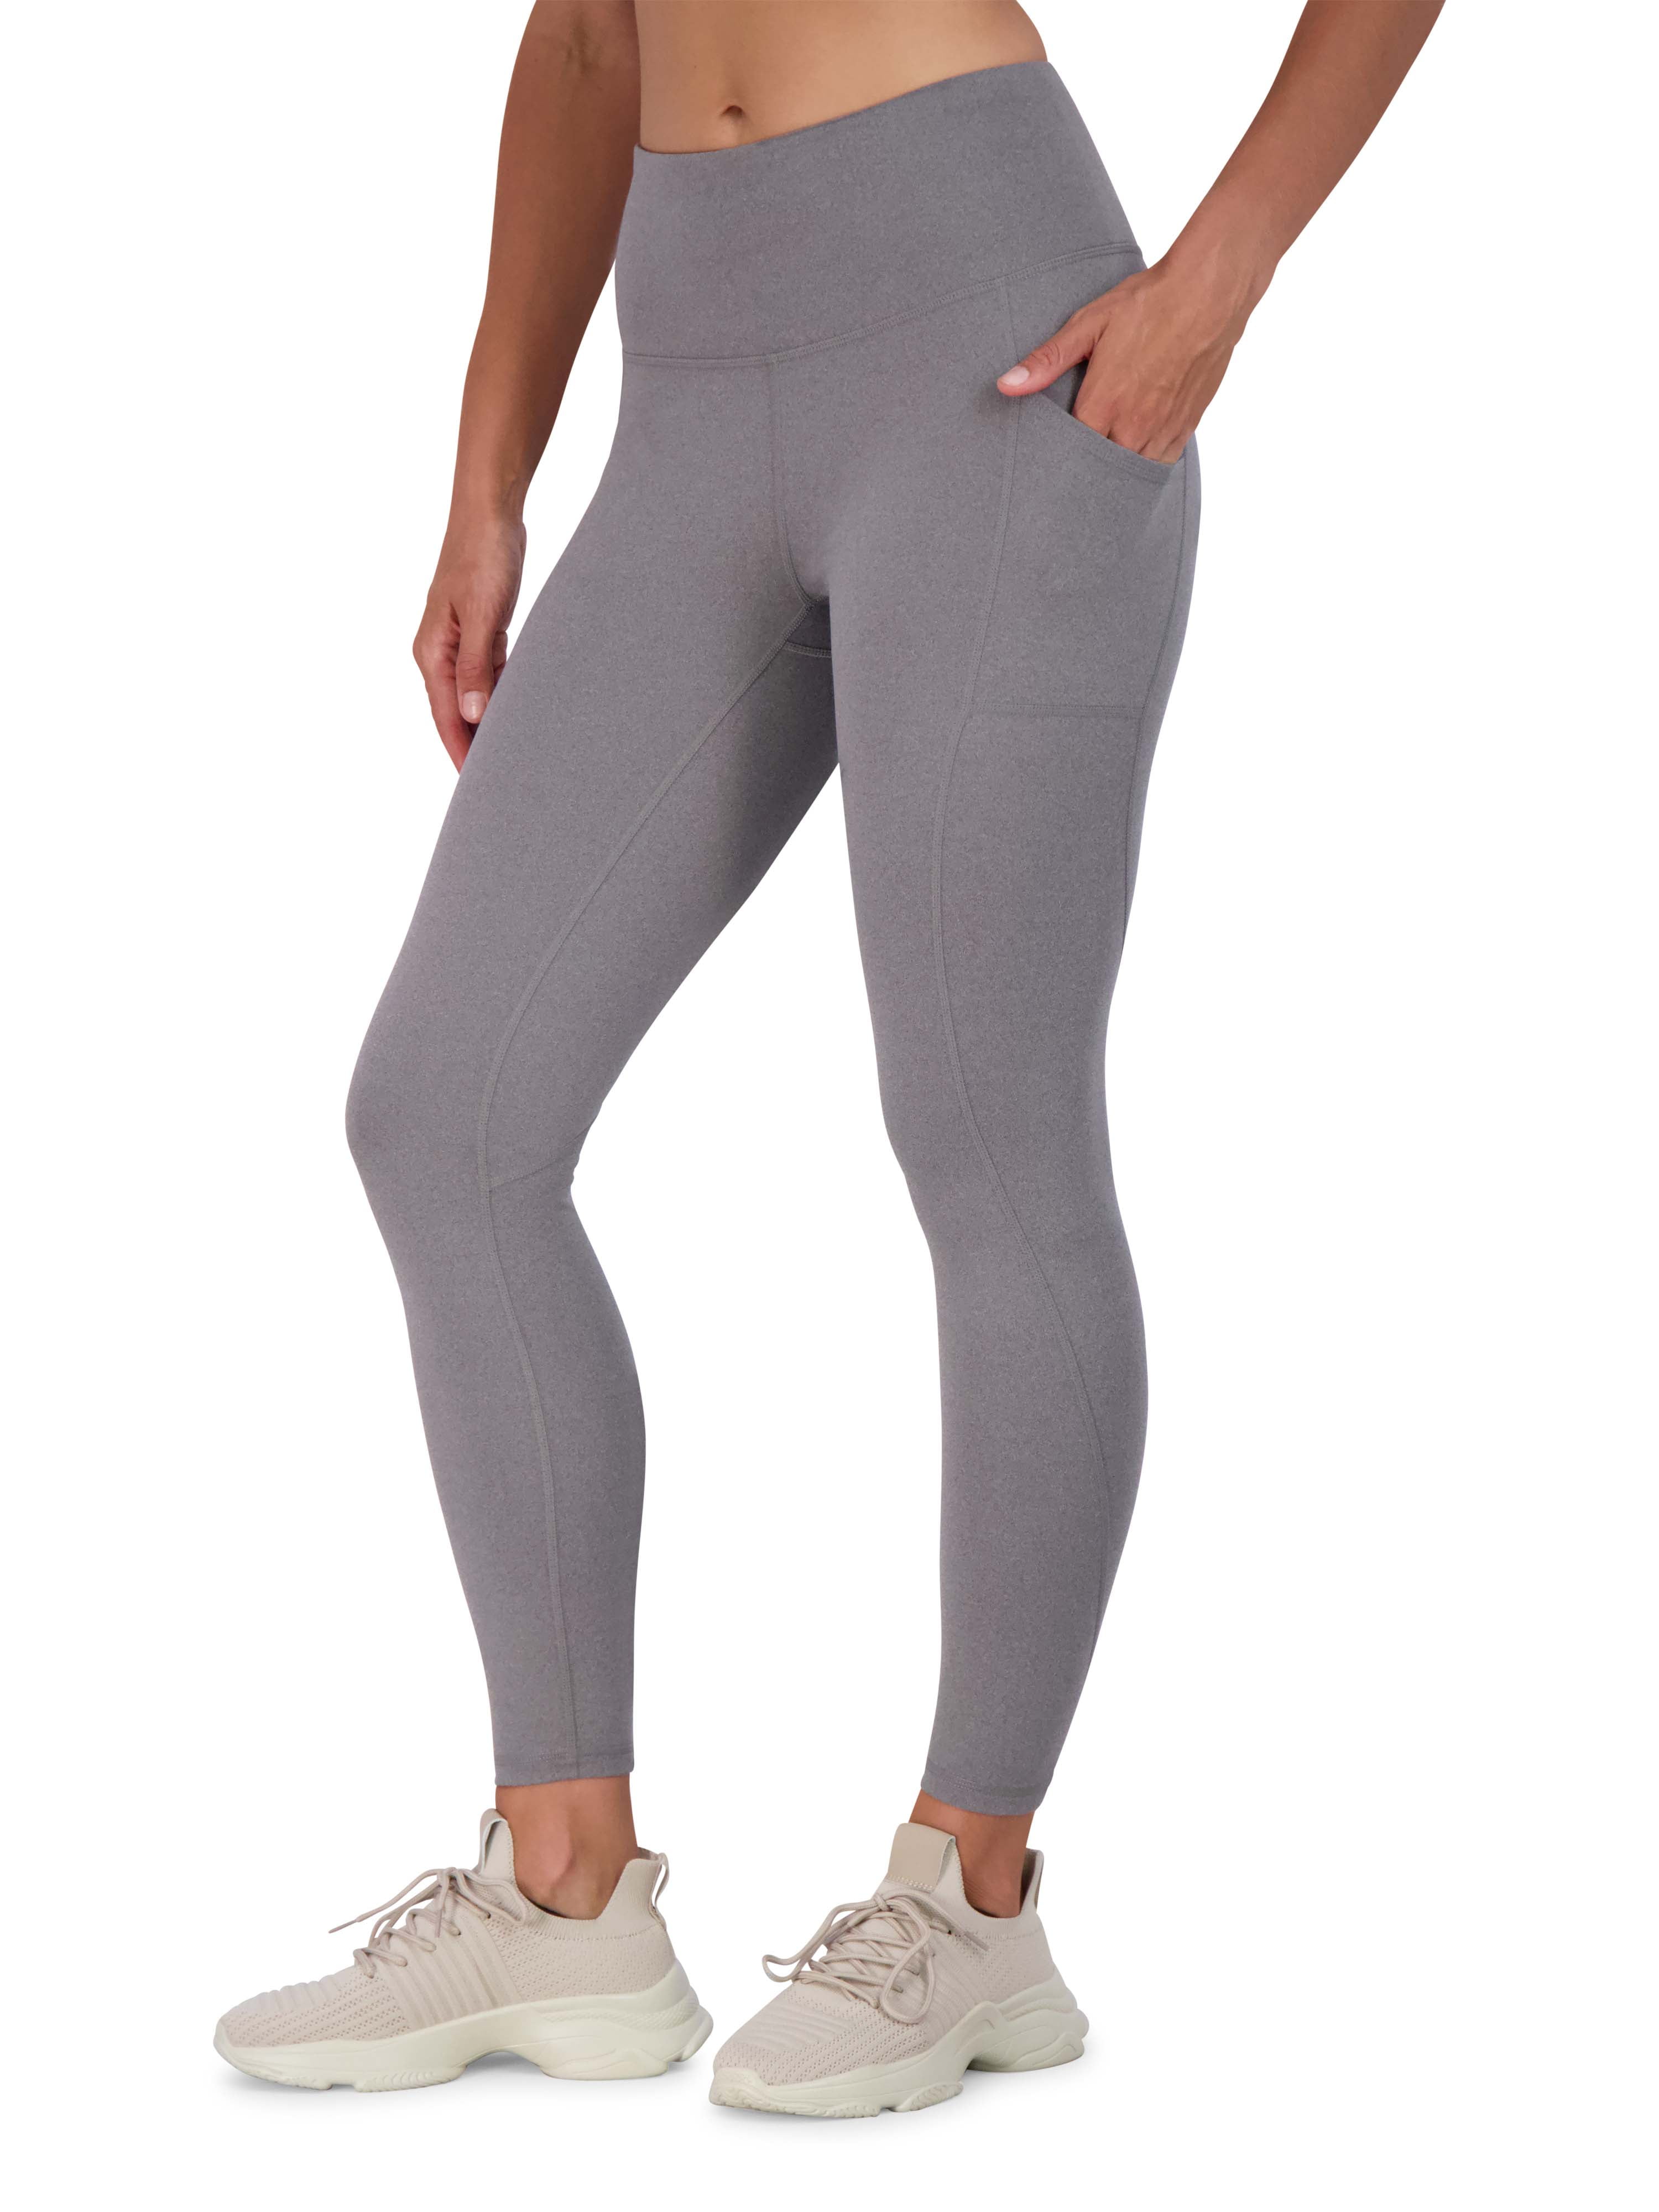 Tights & Leggings With Pockets. Nike CA